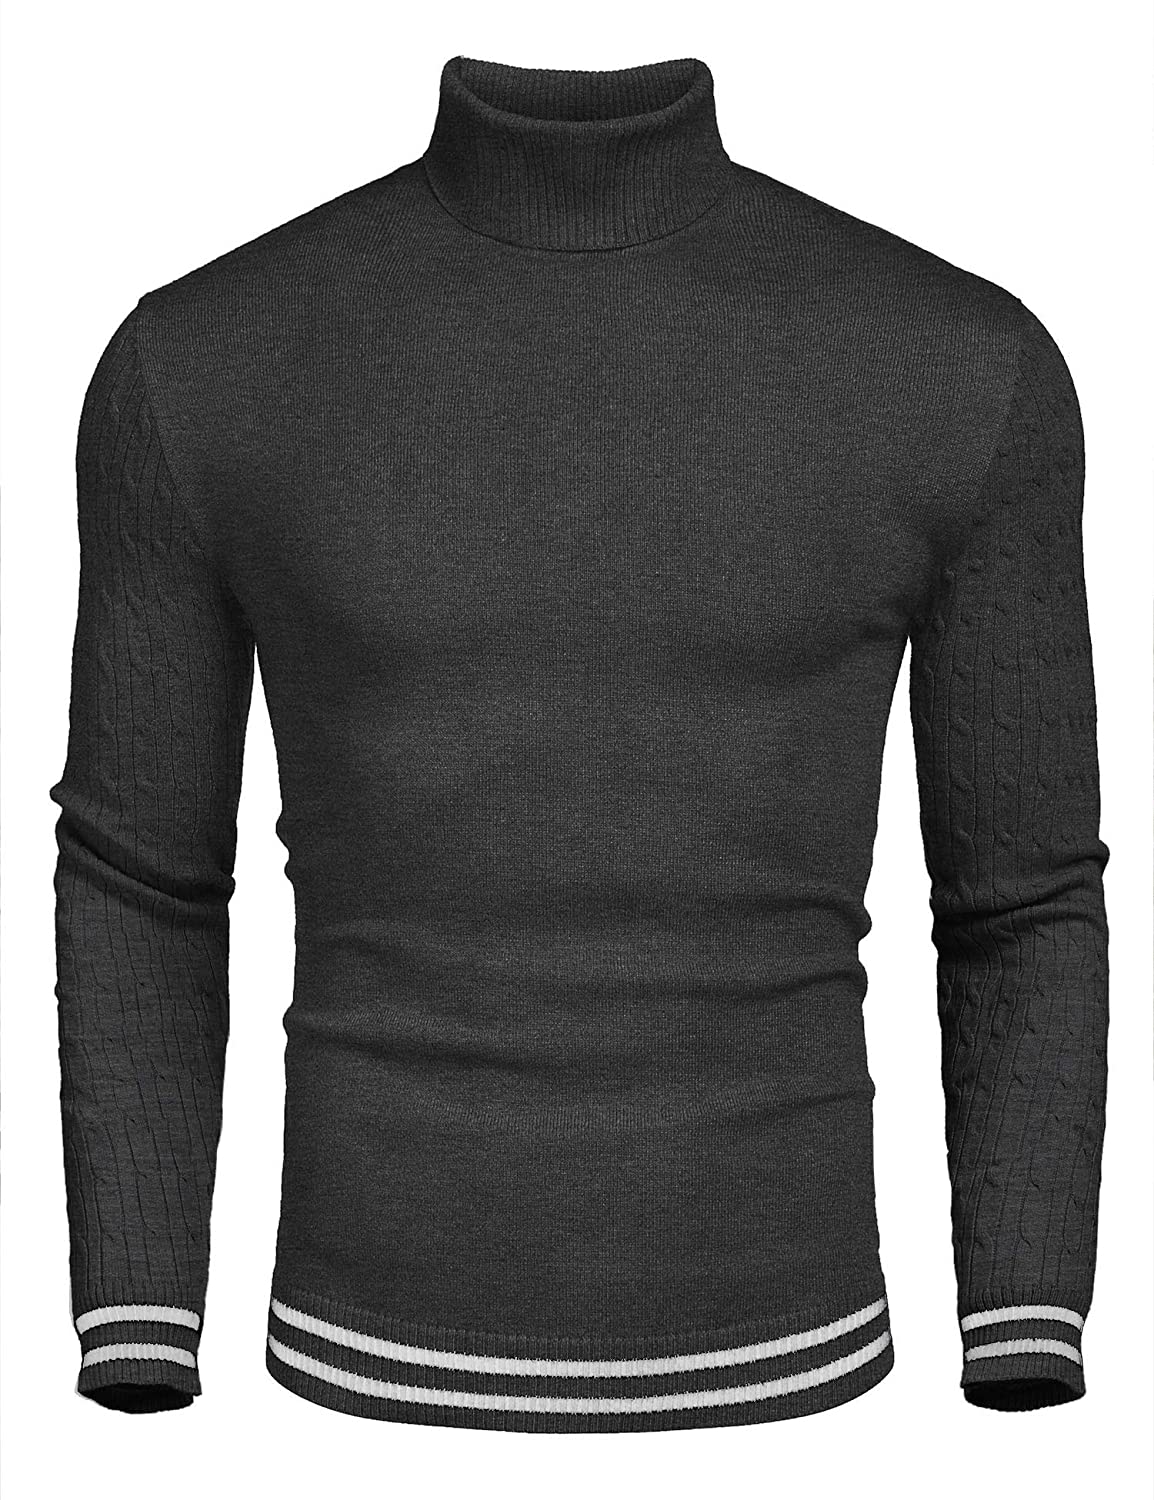 COOFANDY Men's Basic Ribbed Thermal Knitted Pullover Slim Fit ...